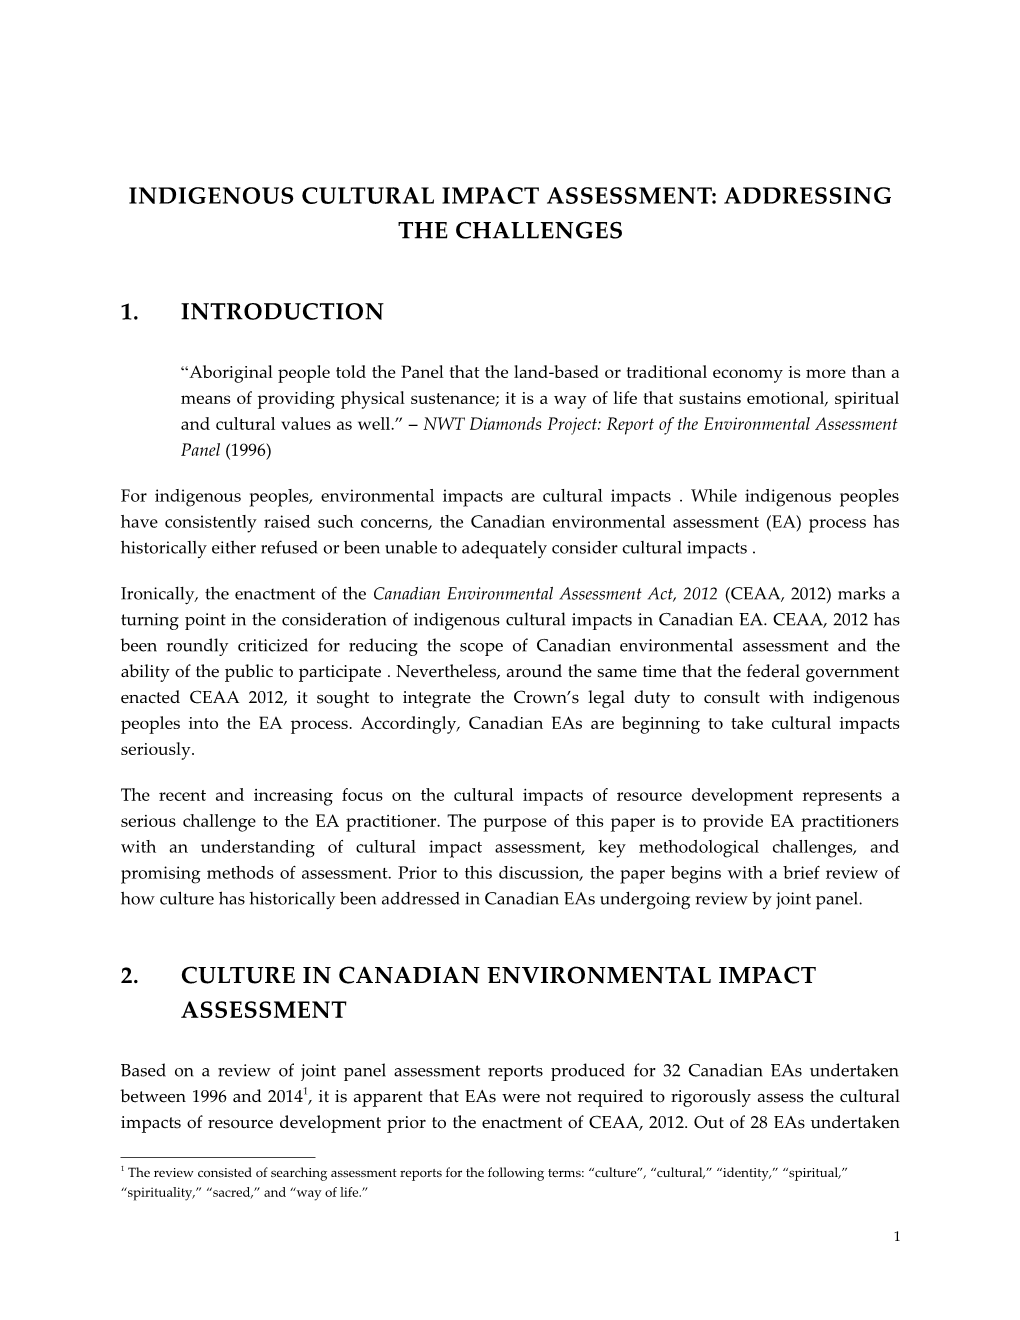 Indigenous Cultural Impact Assessment: Addressing the Challenges